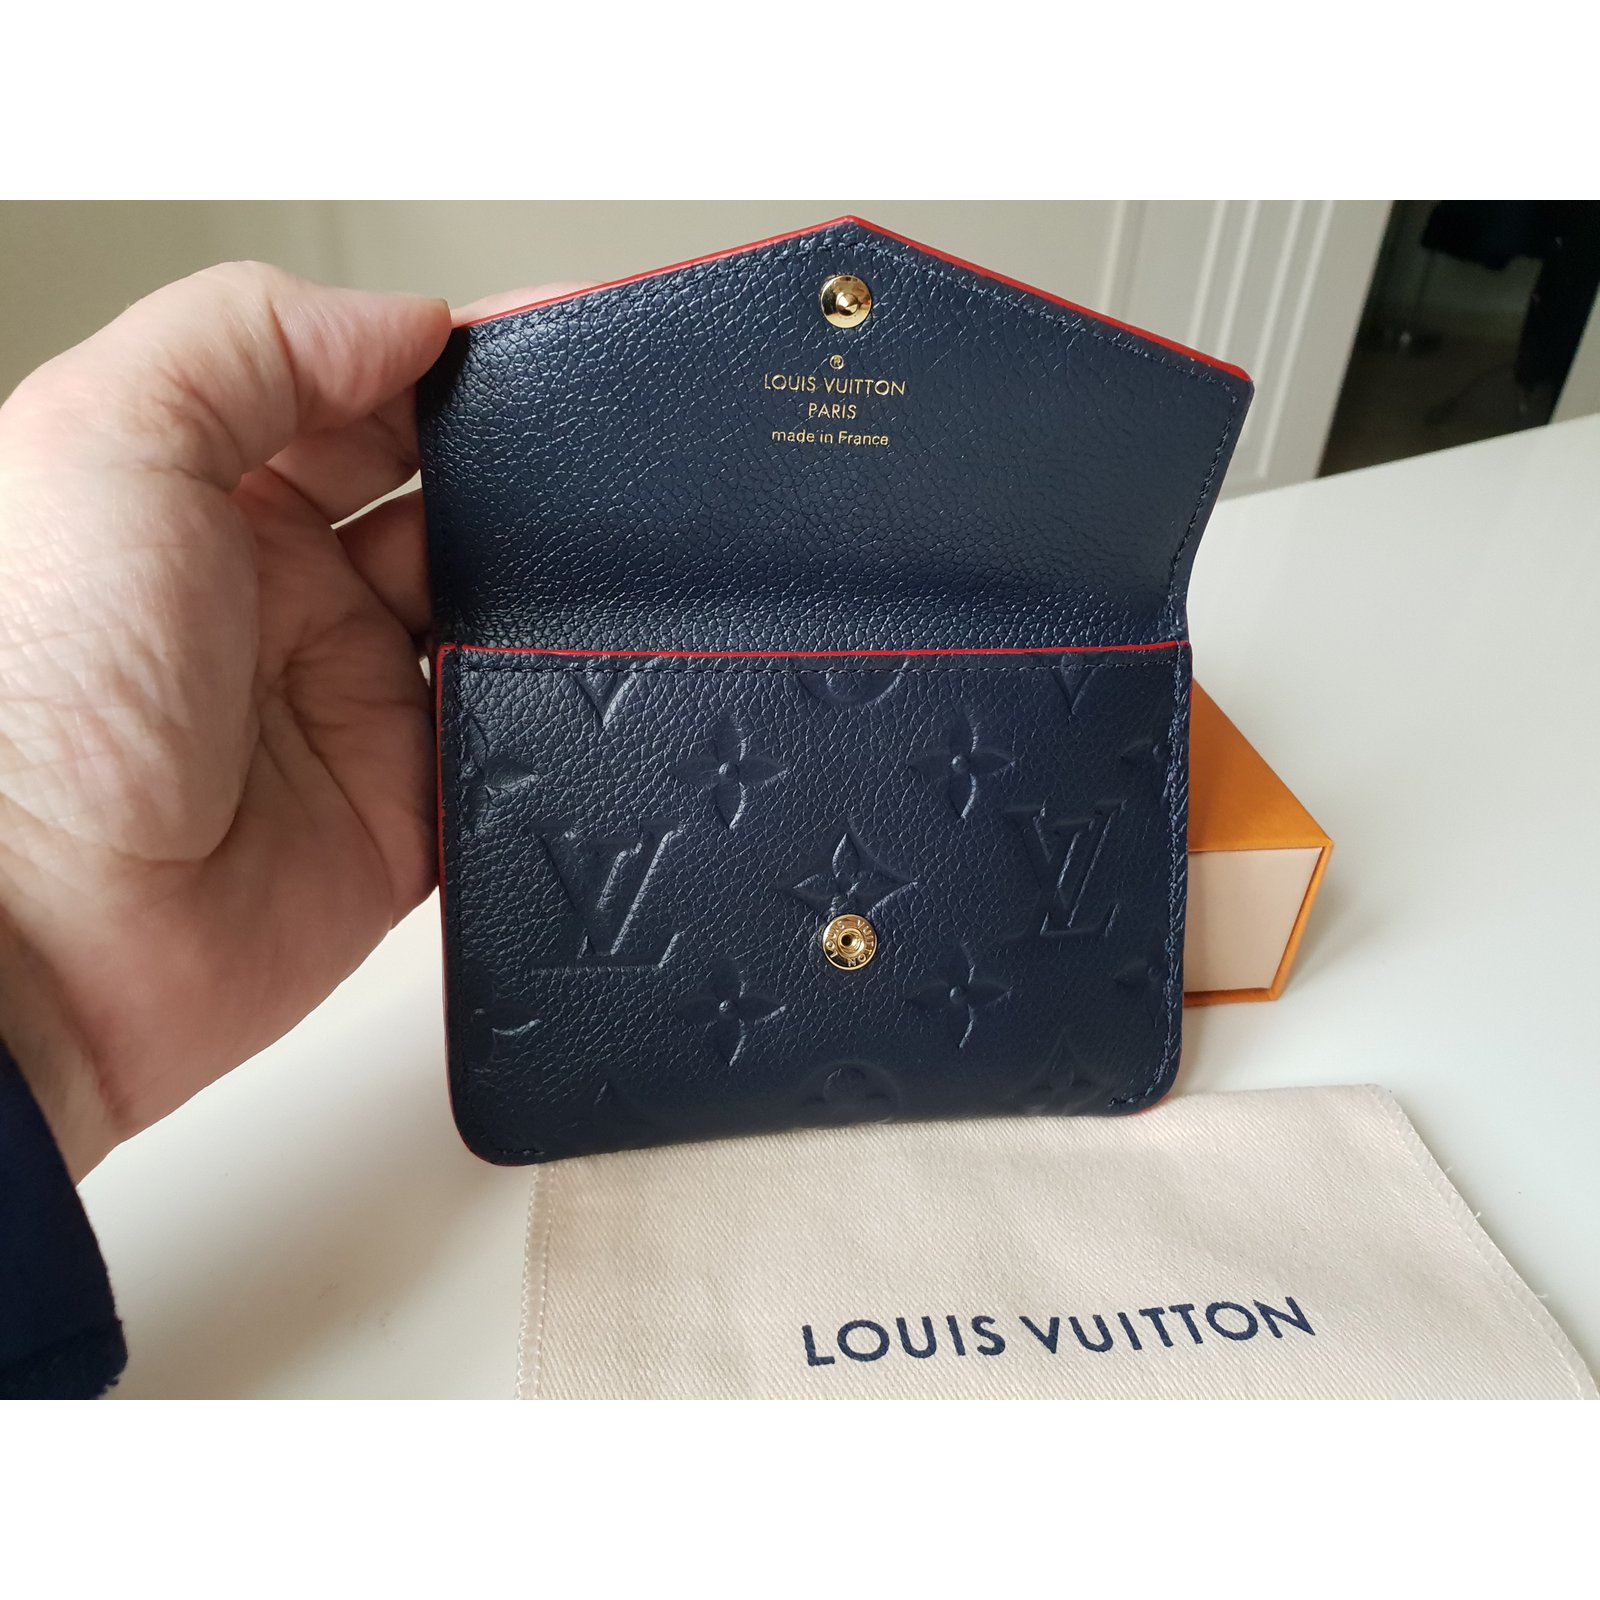 The Lana 23 with the Lv key pouch. : r/handbags